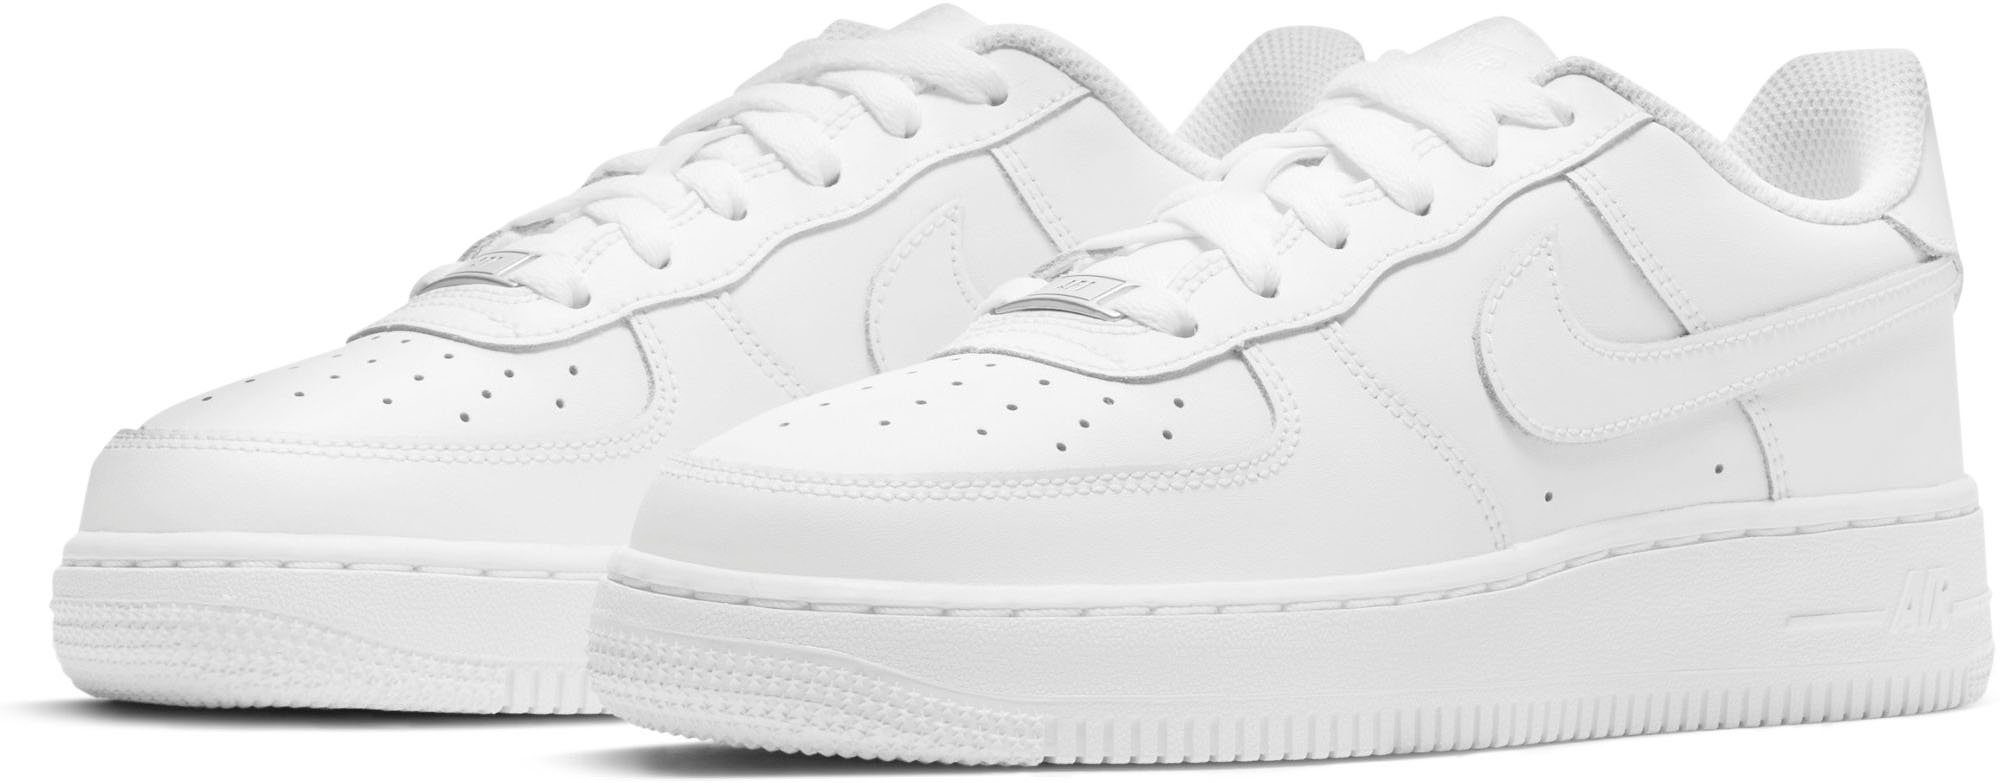 Nike Air Force Low » Schuhe Nike Air Force Low online kaufen | OTTO